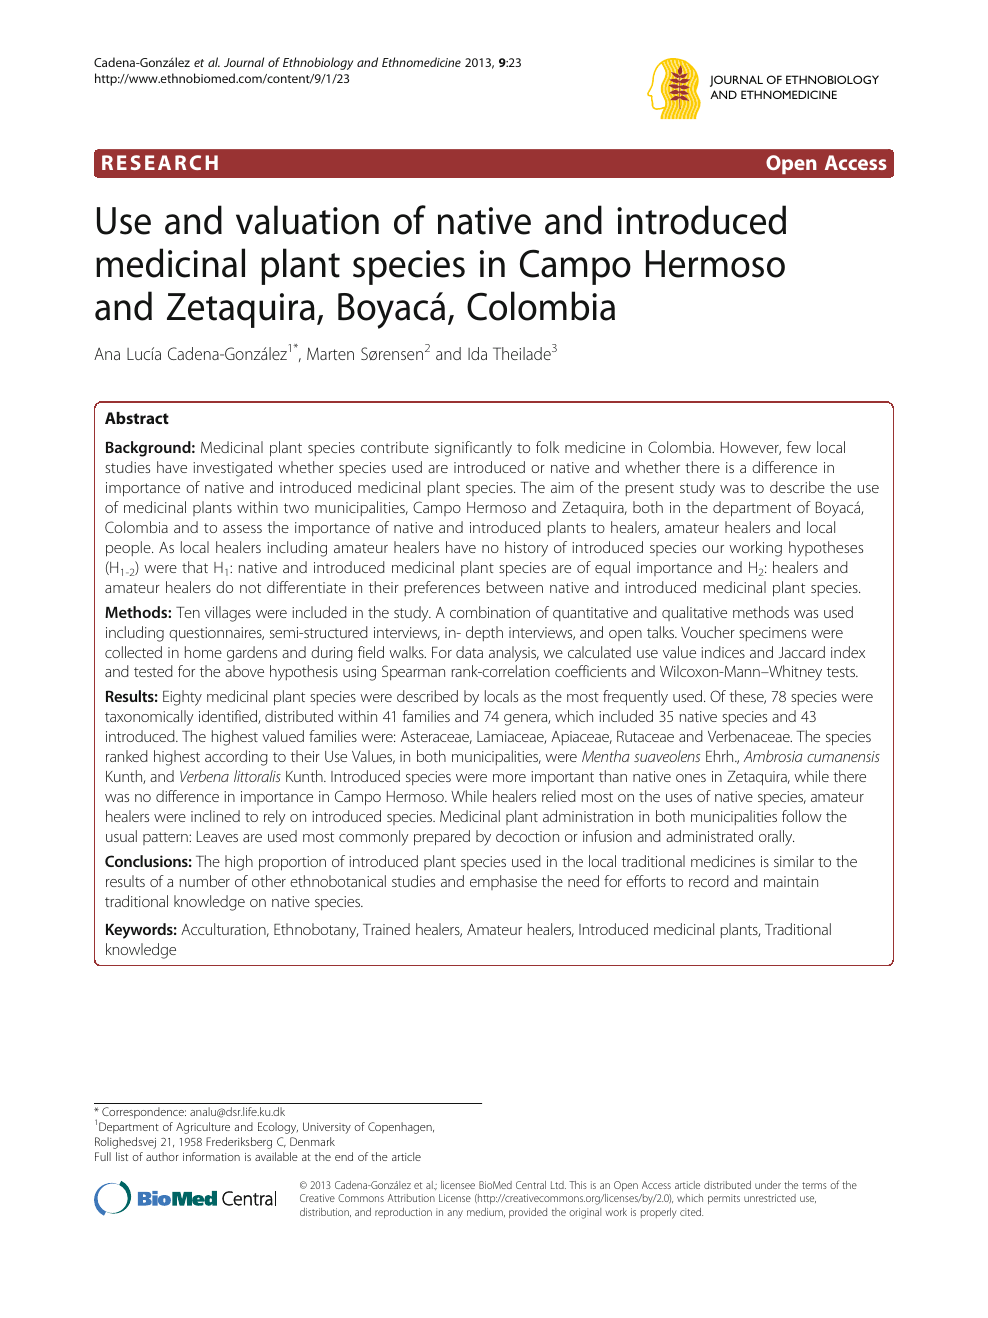 Use and valuation of native and introduced medicinal plant species in Campo Hermoso and Zetaquira, Boyacá, Colombia picture photo